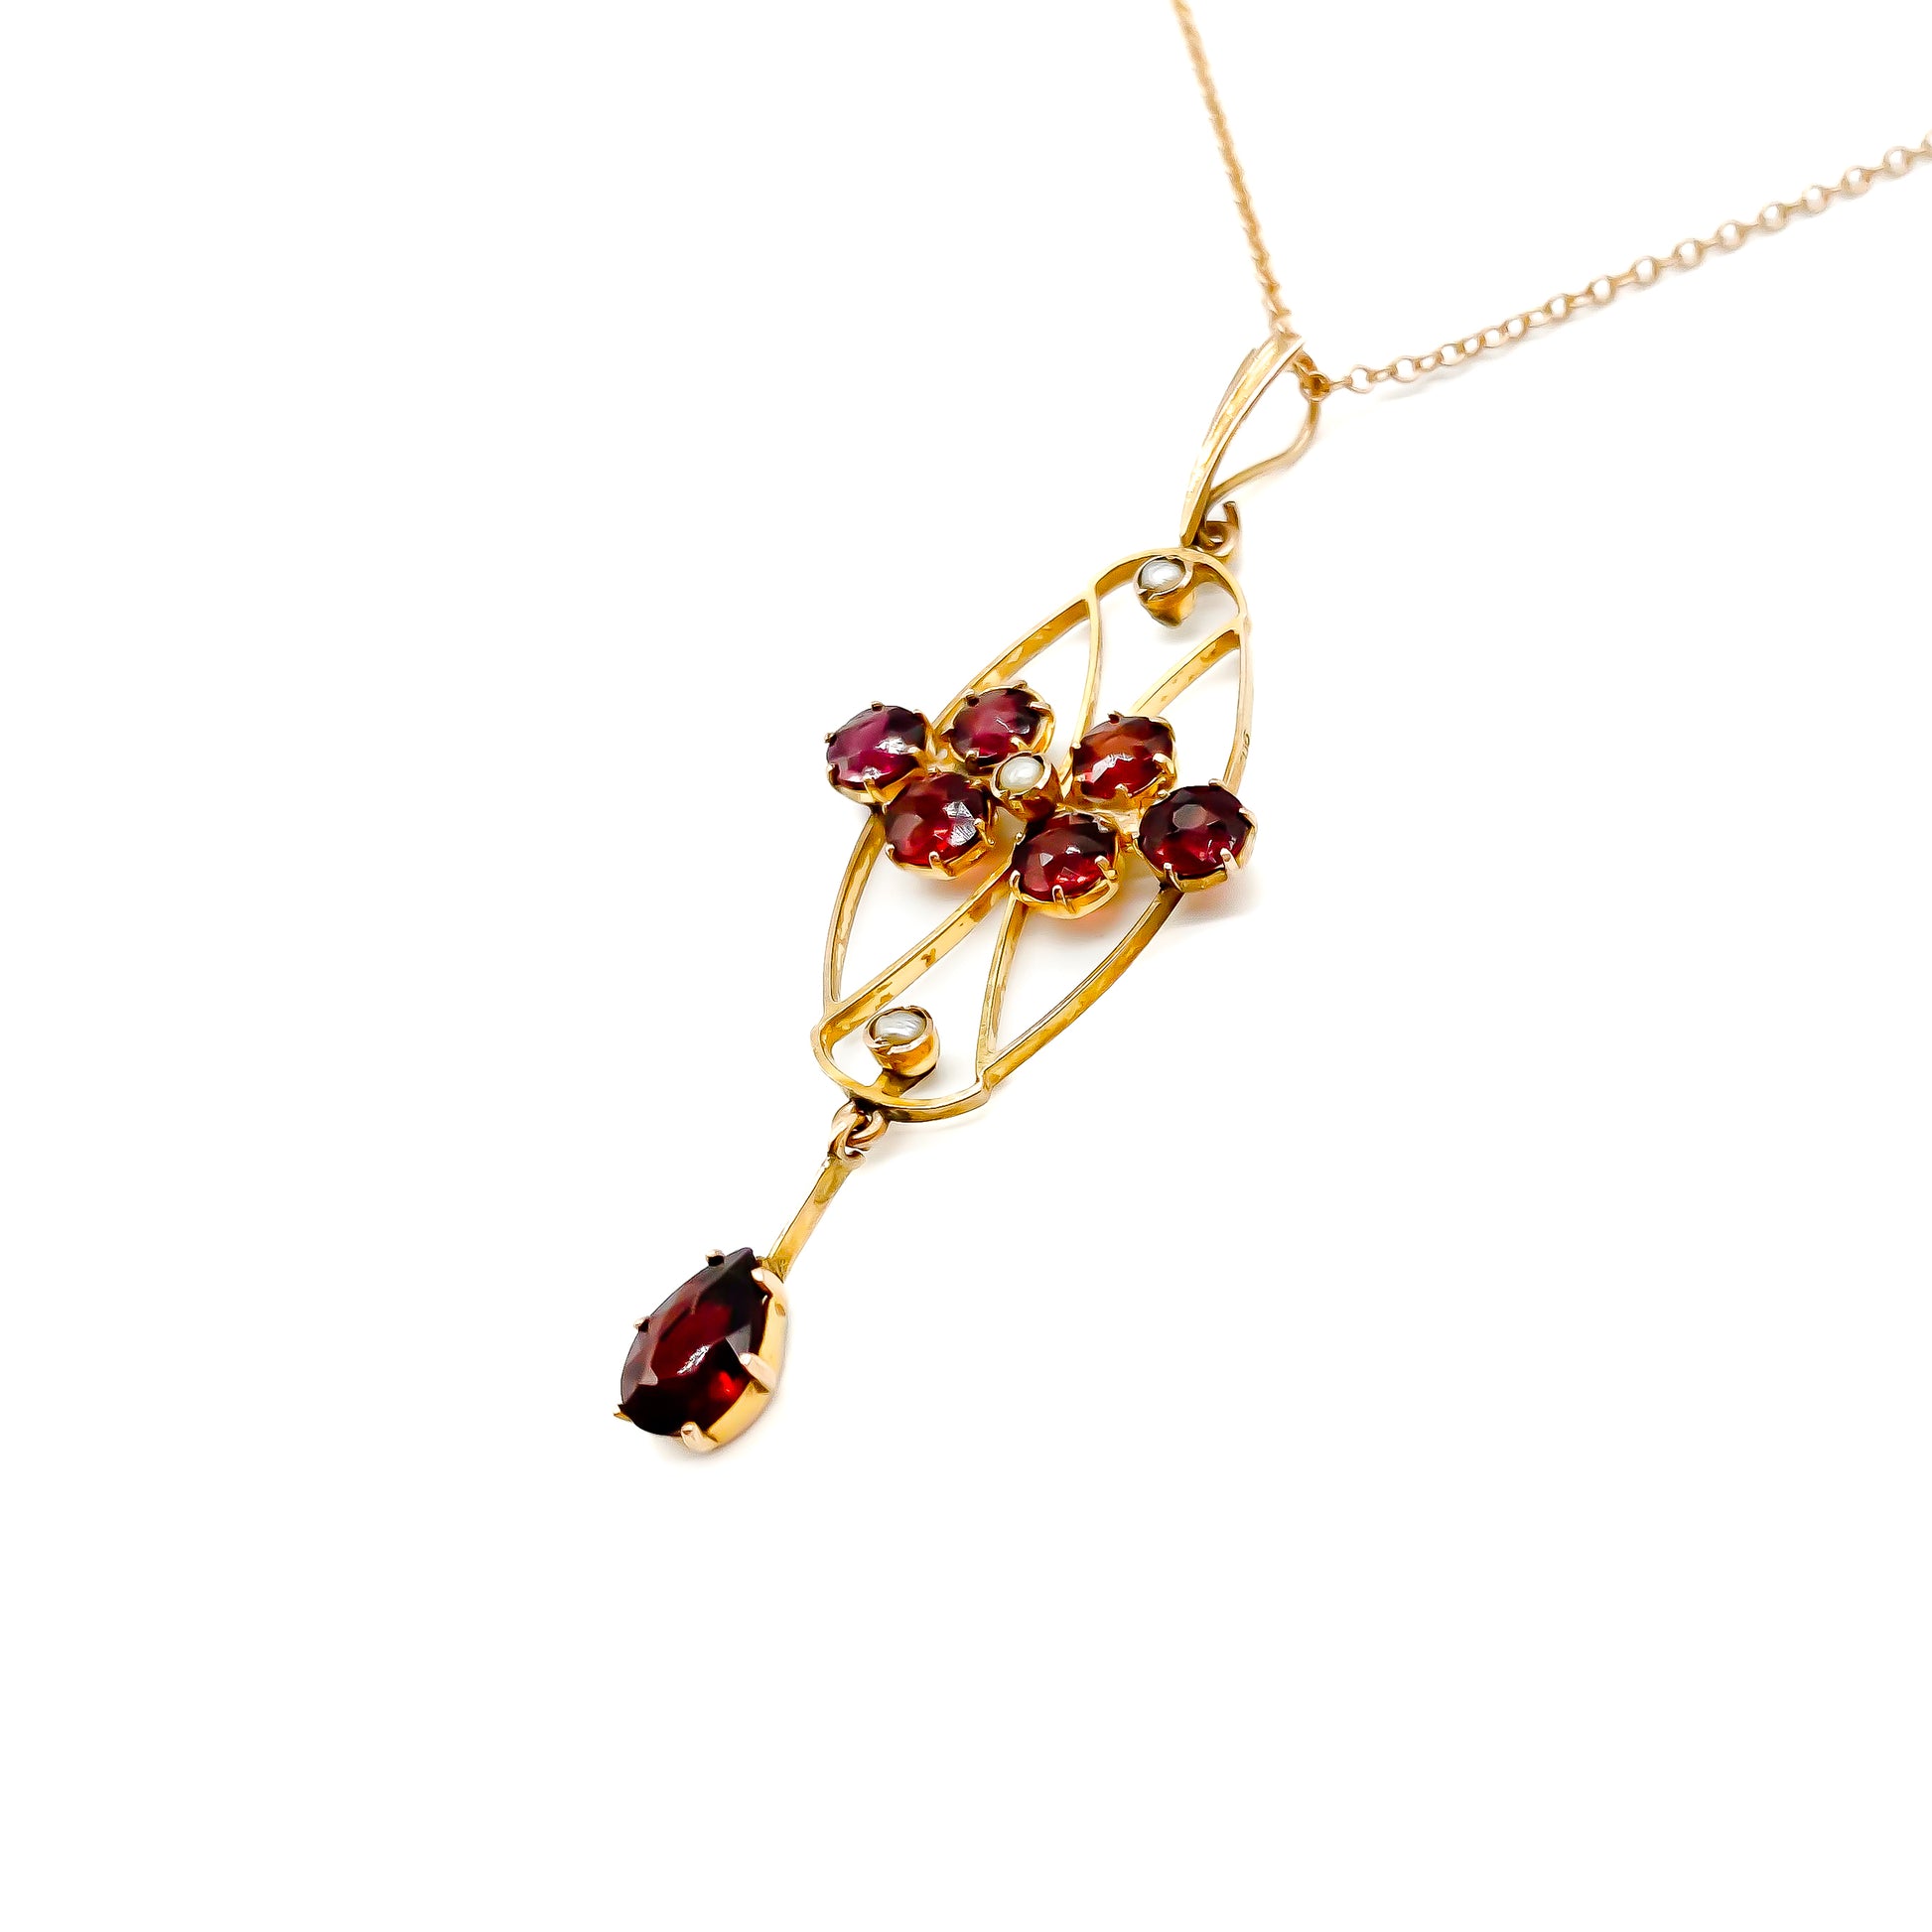 Delicate Edwardian 9ct rose gold garnet and seed pearl pendant on a 9ct rose gold chain.